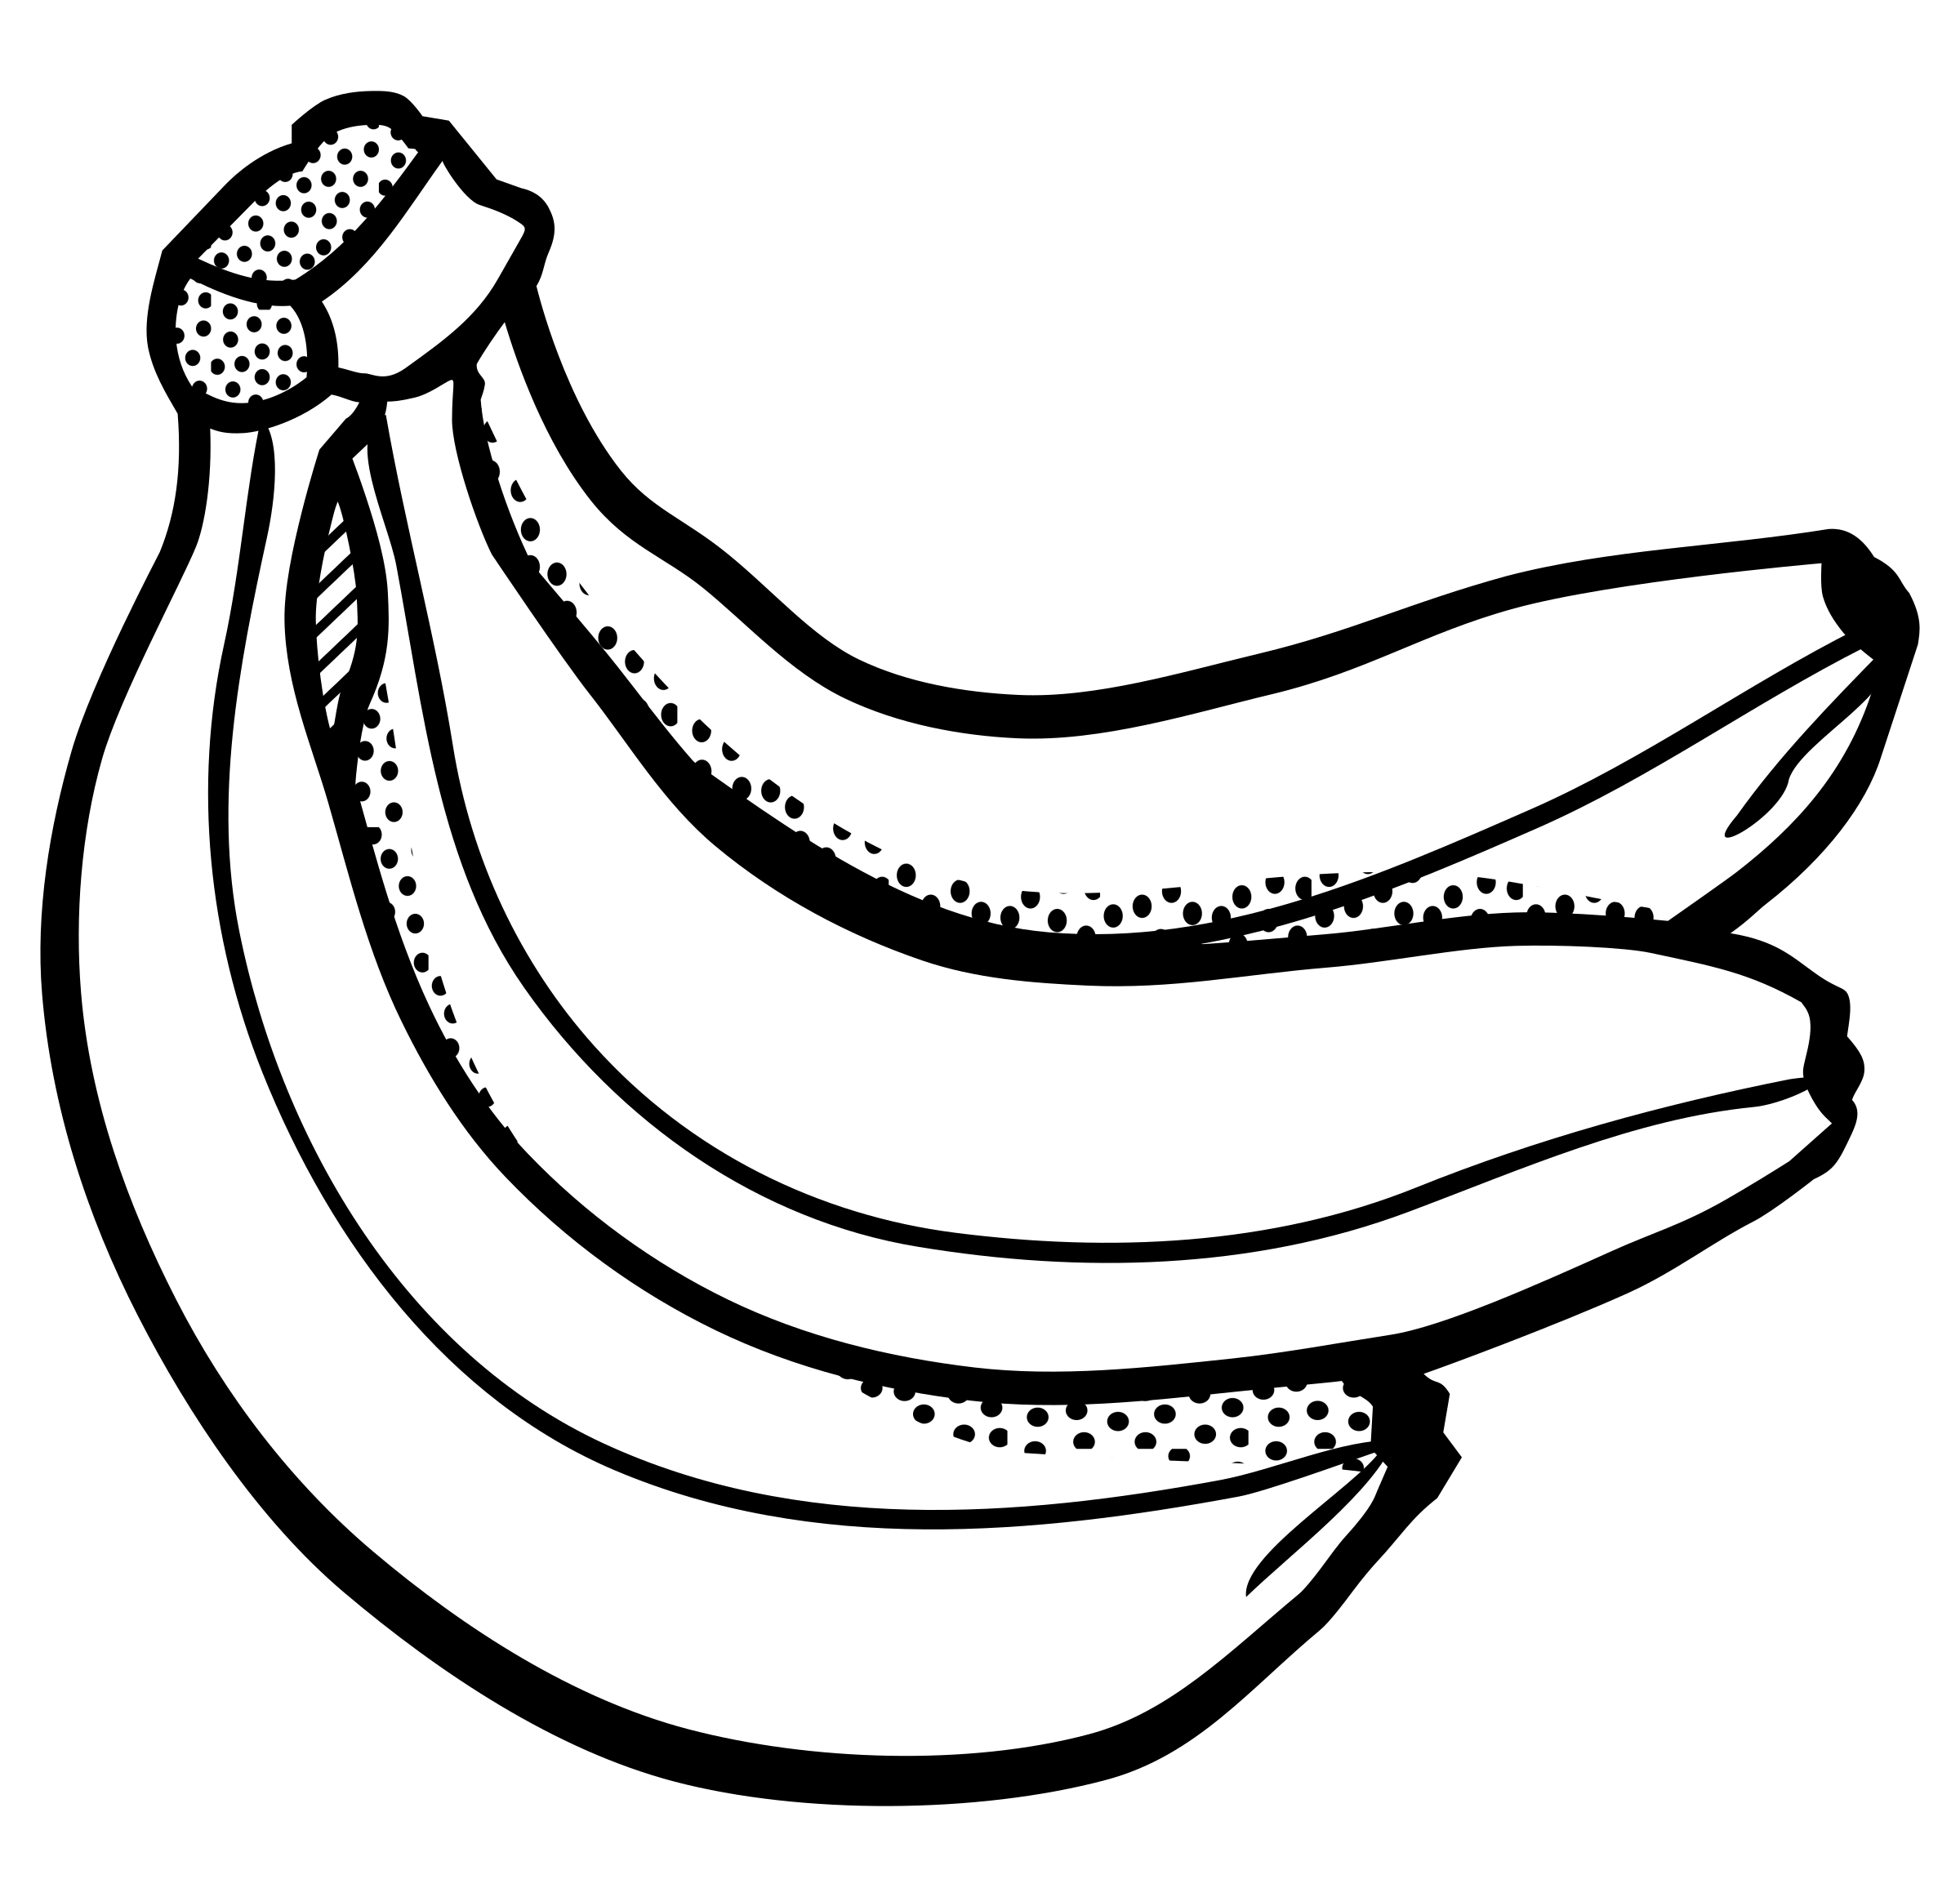 Free Clipart Banana Black And White, Download Free Clip Art